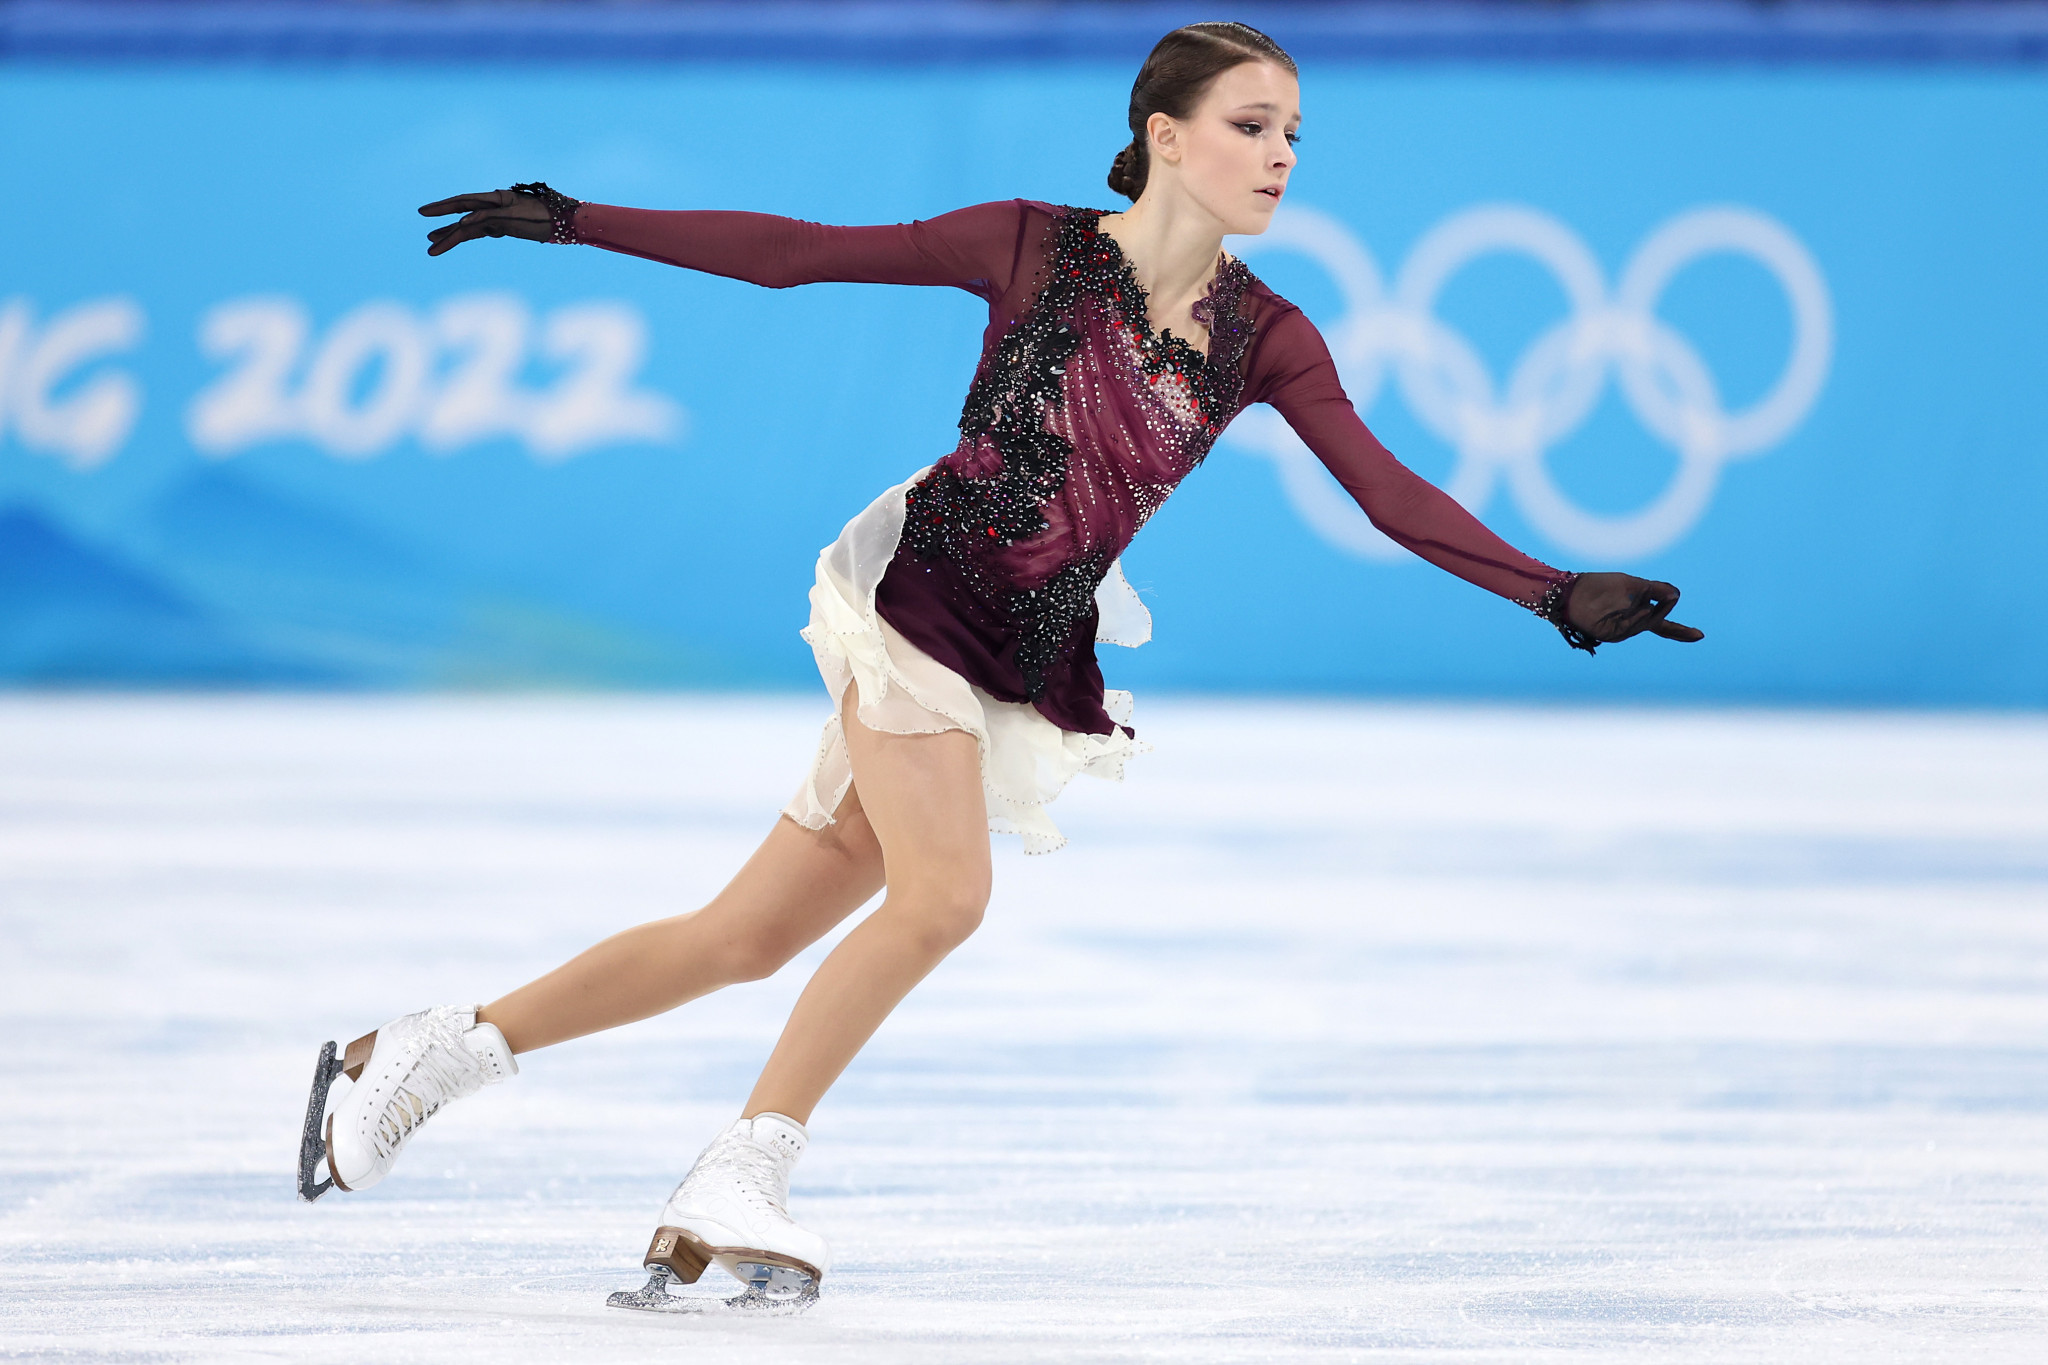 Anna Shcherbakova was missing from the Olympic Day collage made by the ISU ©Getty Images